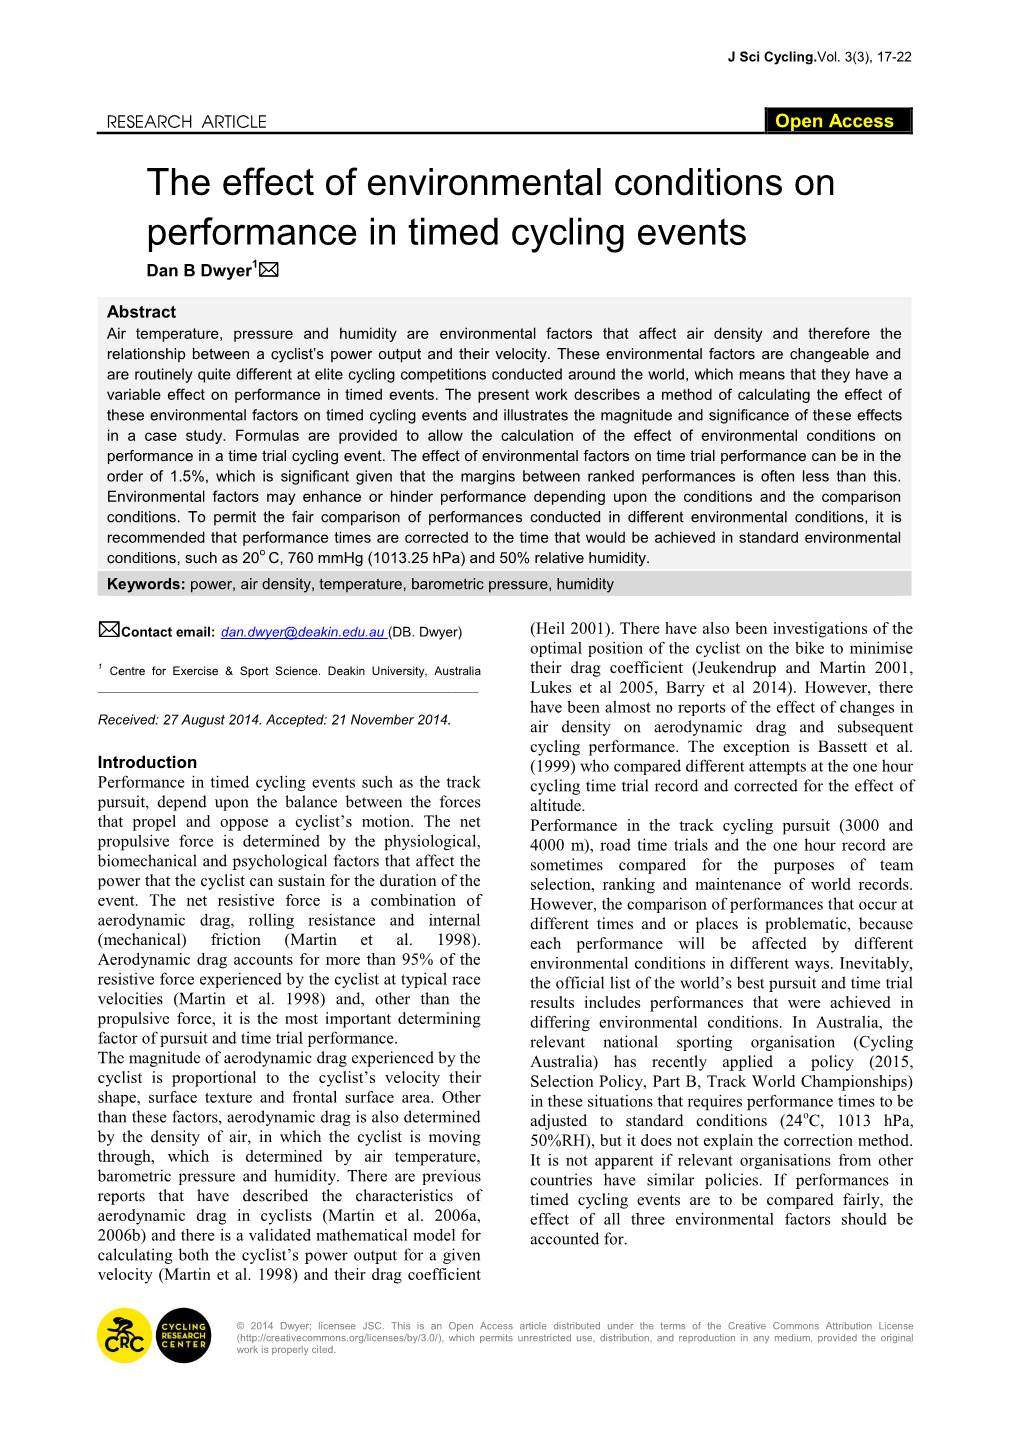 The Effect of Environmental Conditions on Performance in Timed Cycling Events Dan B Dwyer1